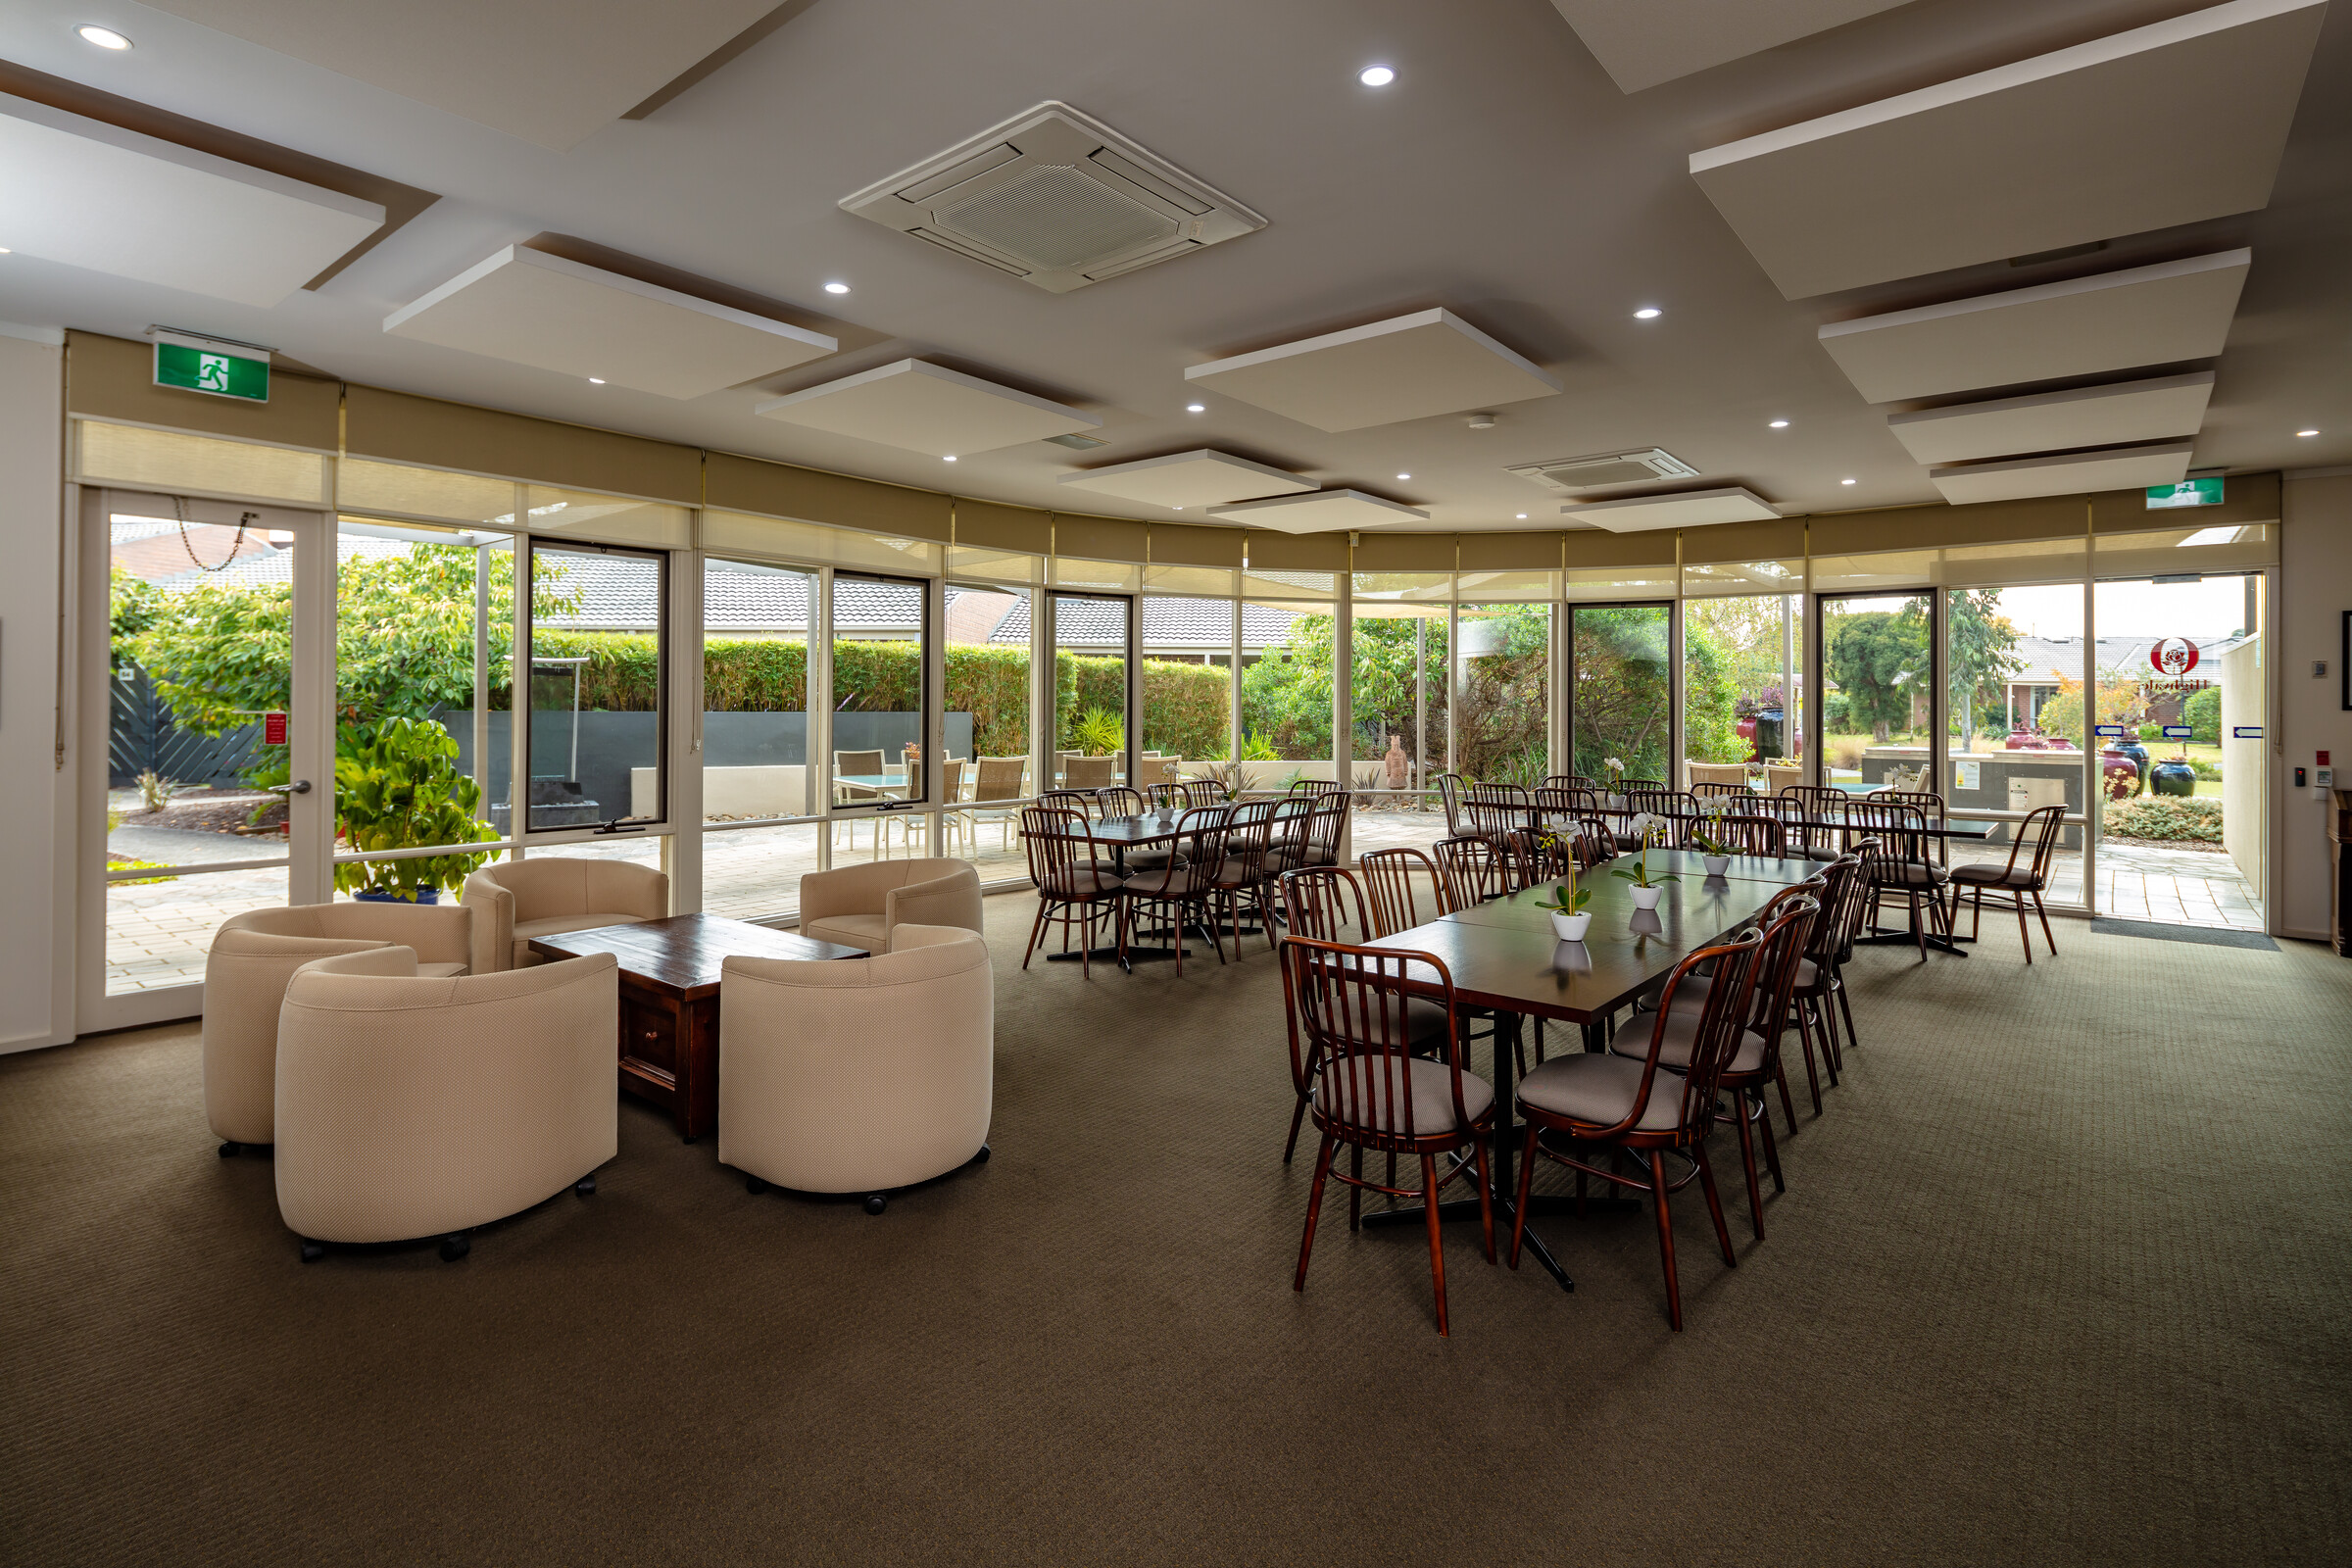 Highvale Village dining room and lounge area with floor to ceiling windows overlooking terrace